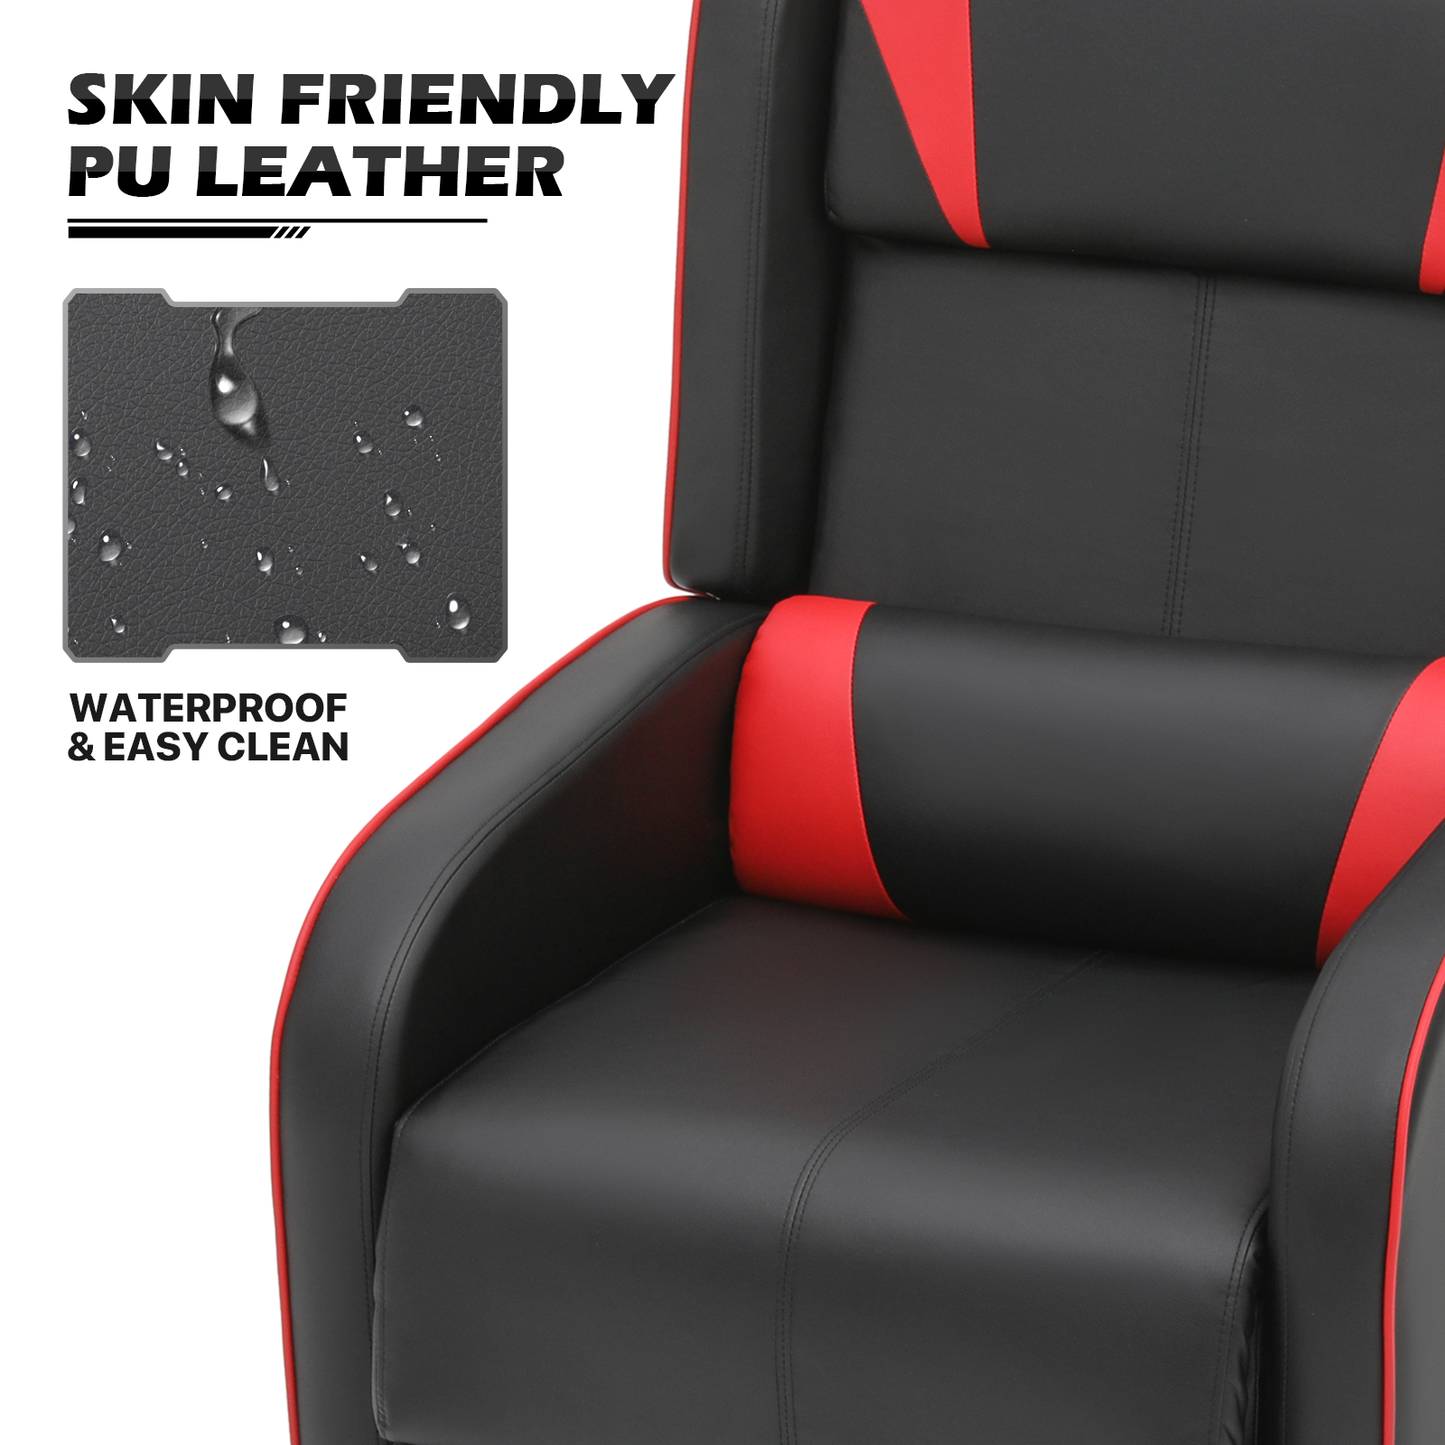 Massage Single Sofa - Reclinable Gaming Chair - PU Leather Seat